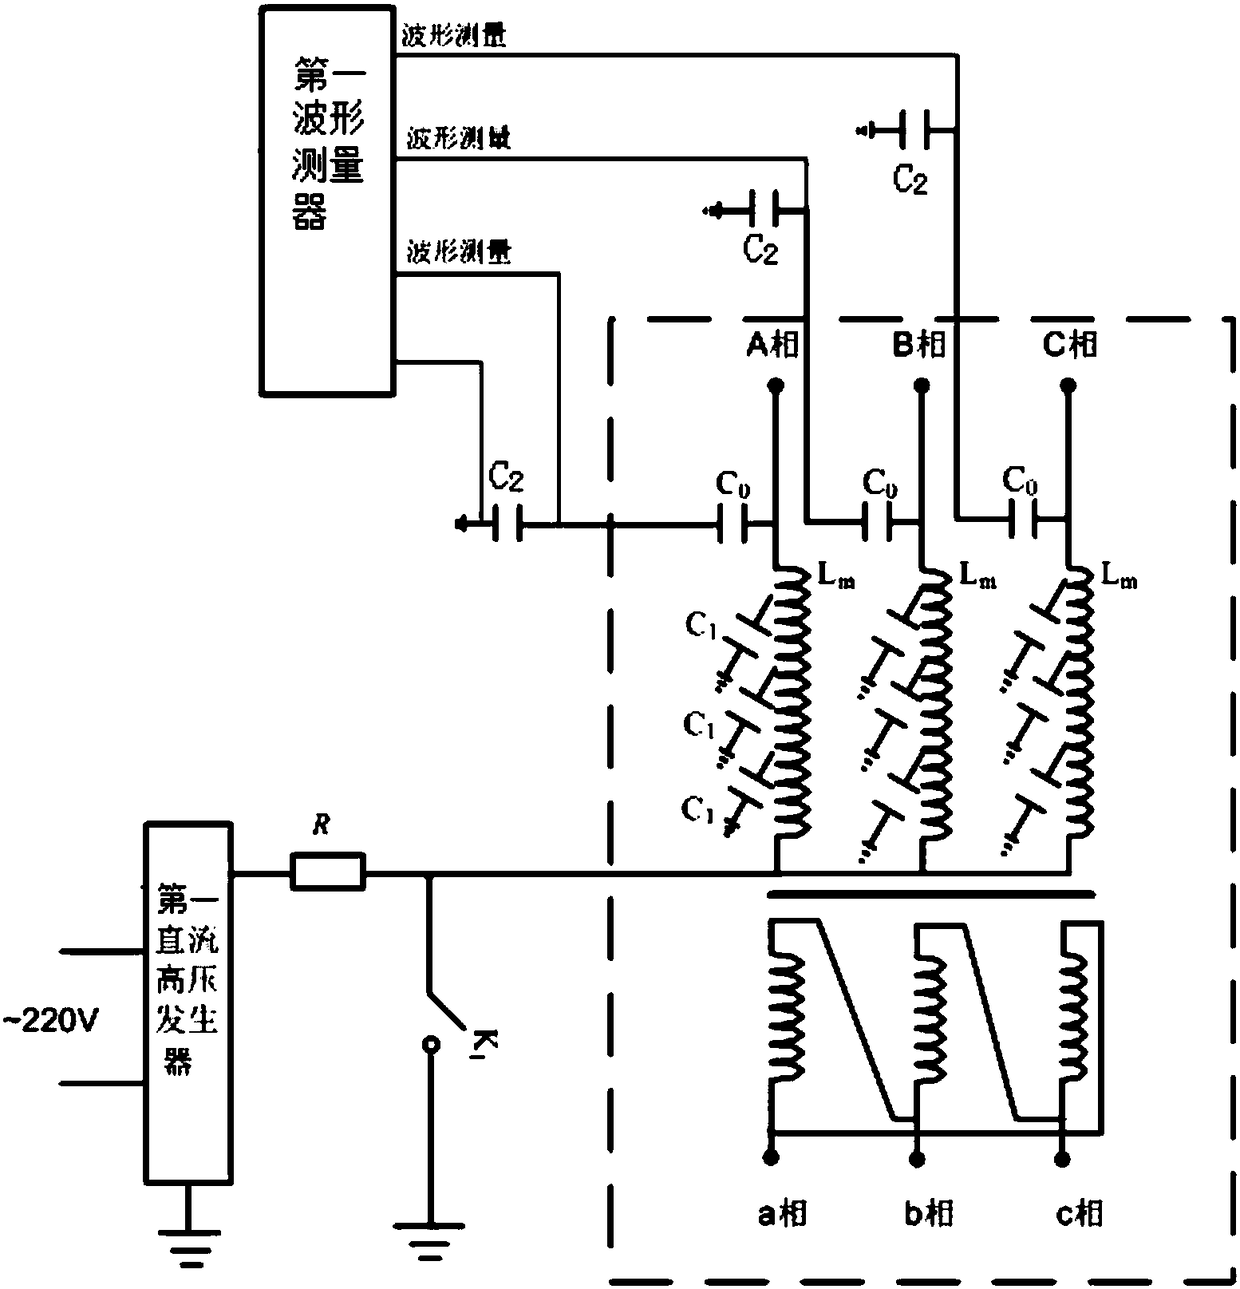 Transformer winding wave process verification method based on self-excited oscillation wave